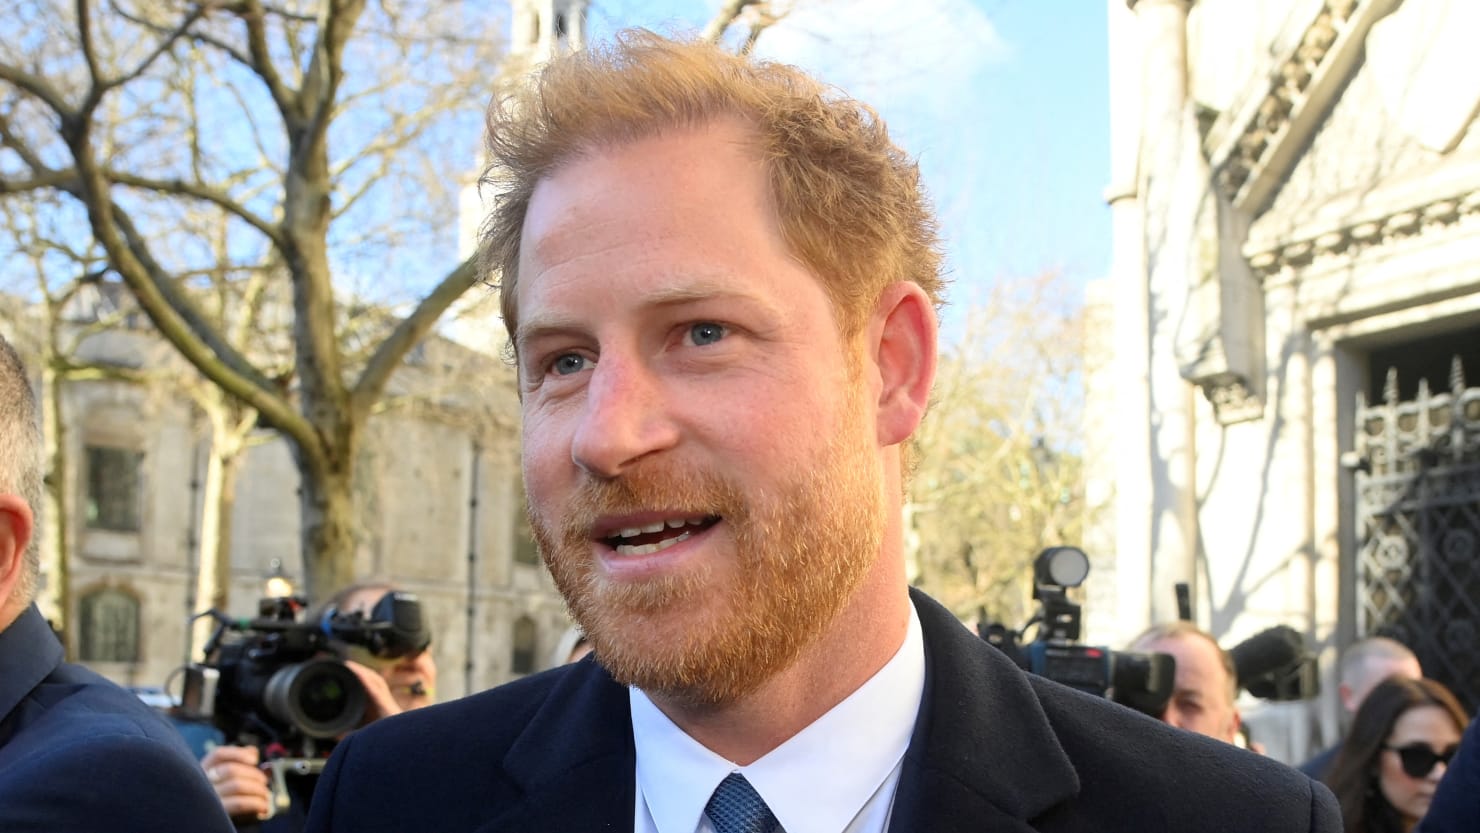 Prince Harry takes stand in phone-hacking case: What to expect